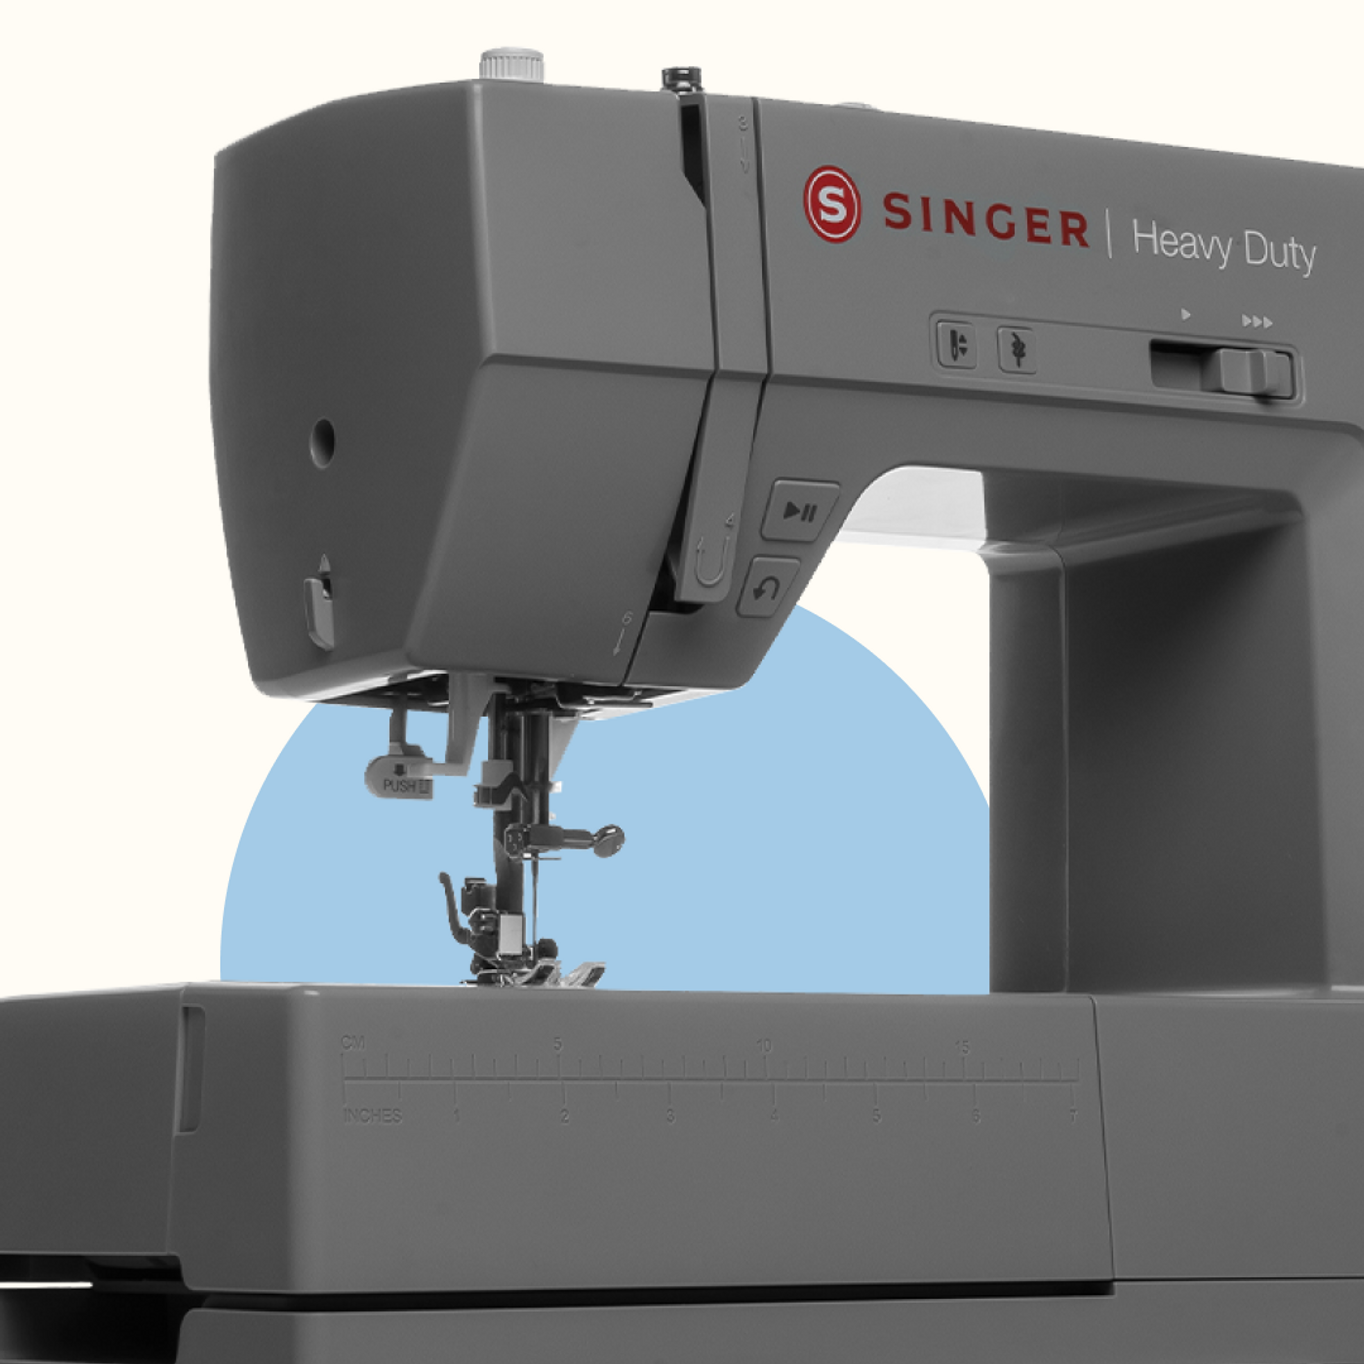 The Heavy Duty Sewing Machine Guide - SINGER®